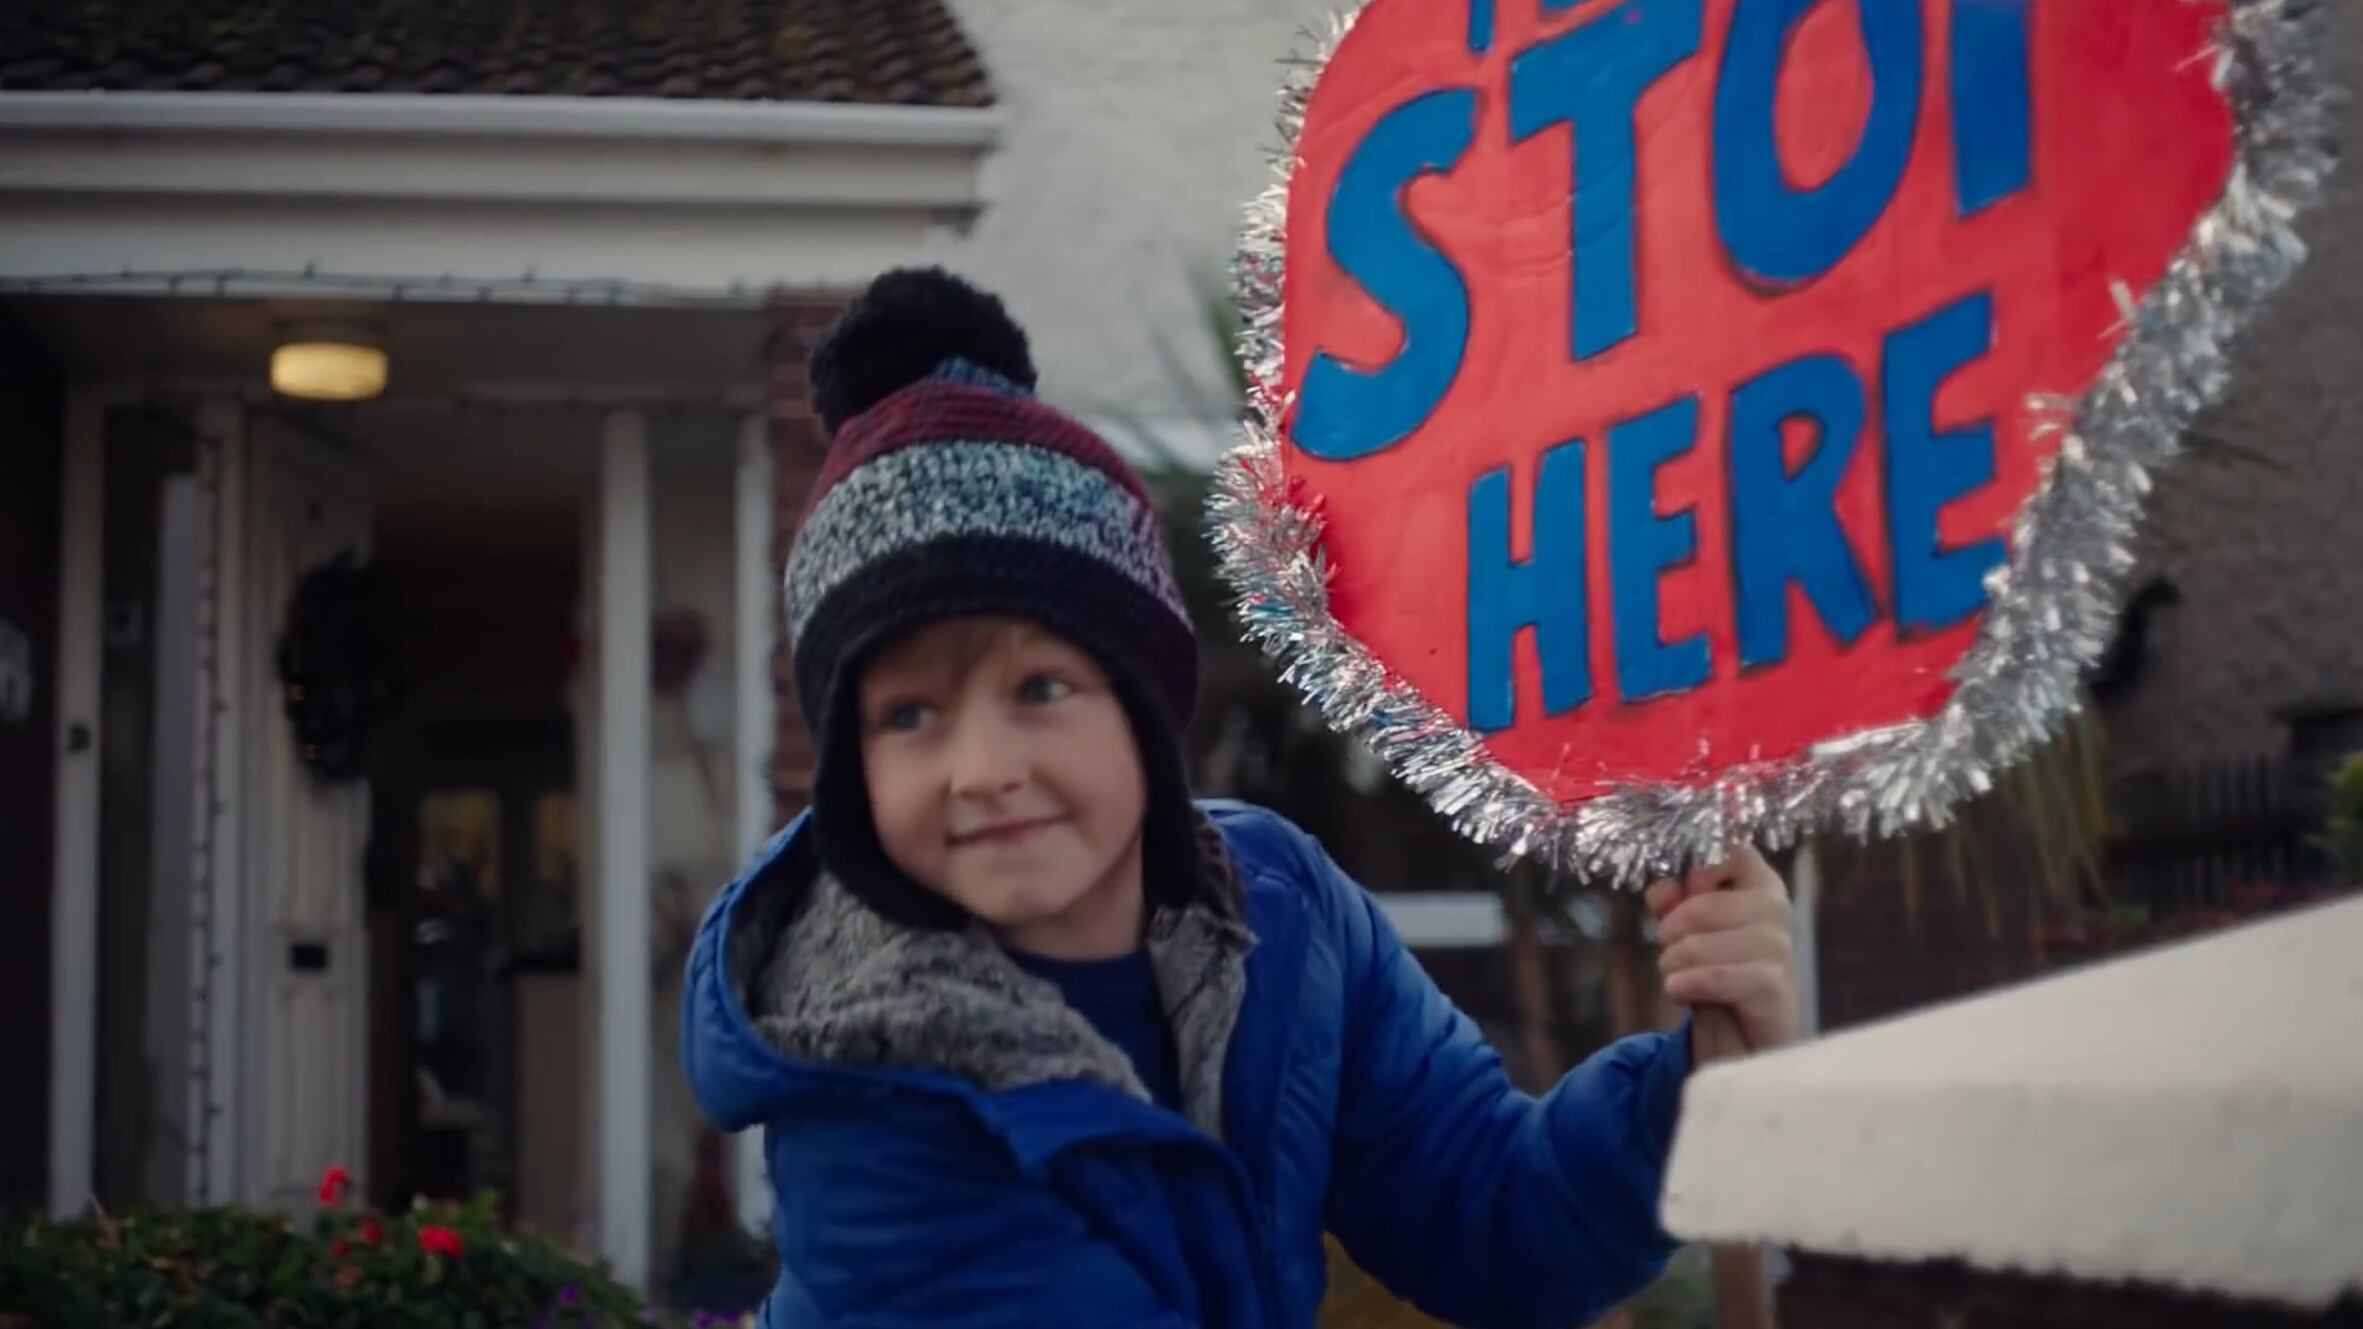 SuperValu’s commercial features a boy called Conor, who is awaiting a mysterious Christmas visitor.